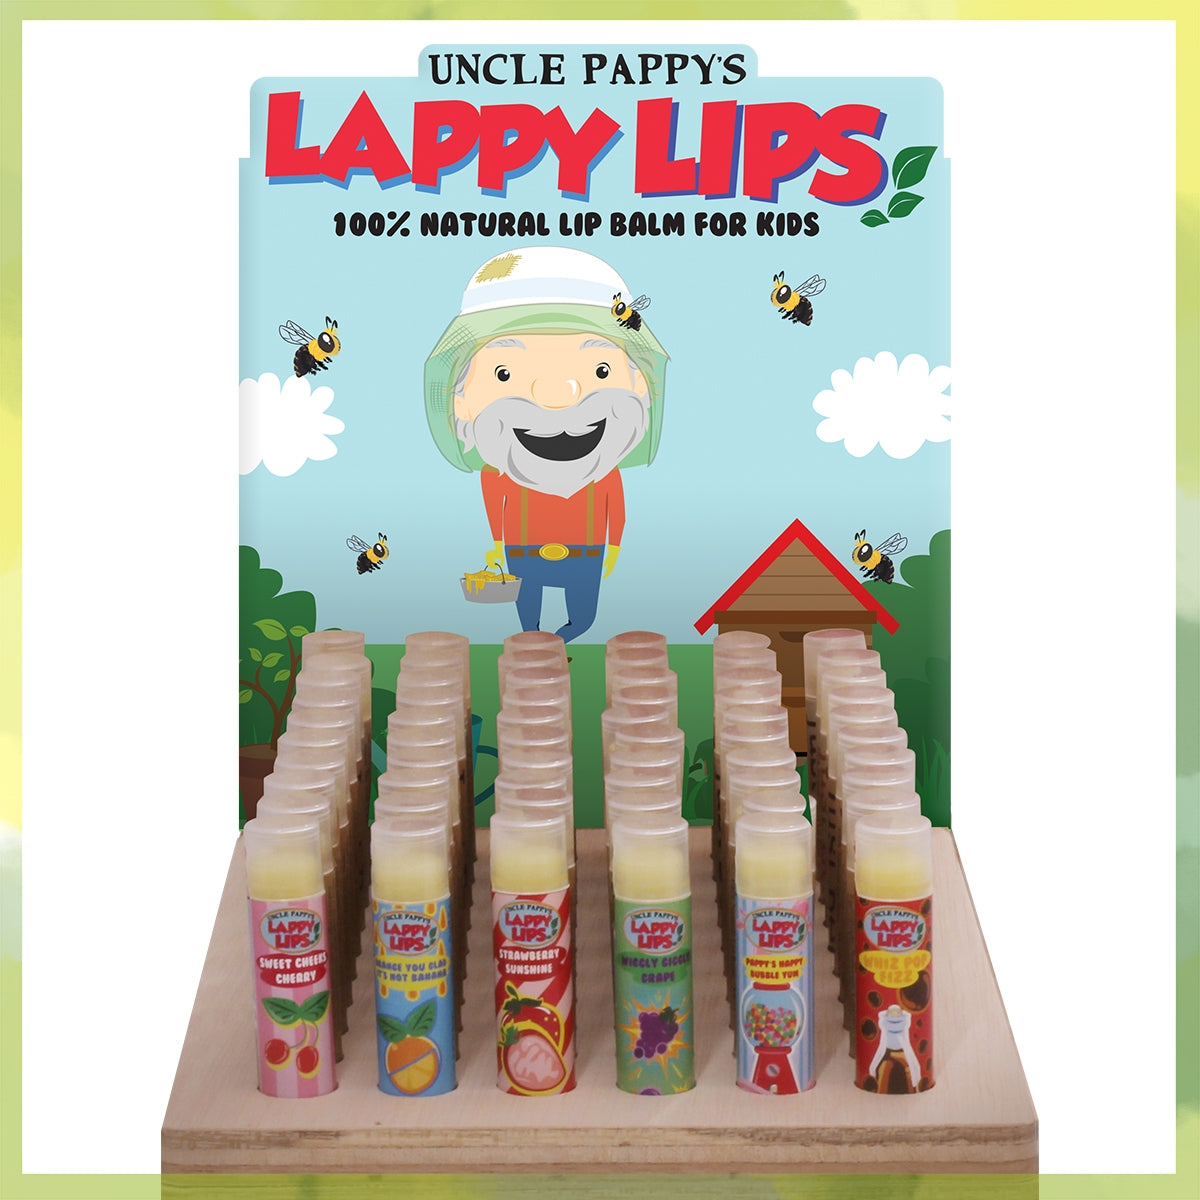 Lappy Lips for Kids